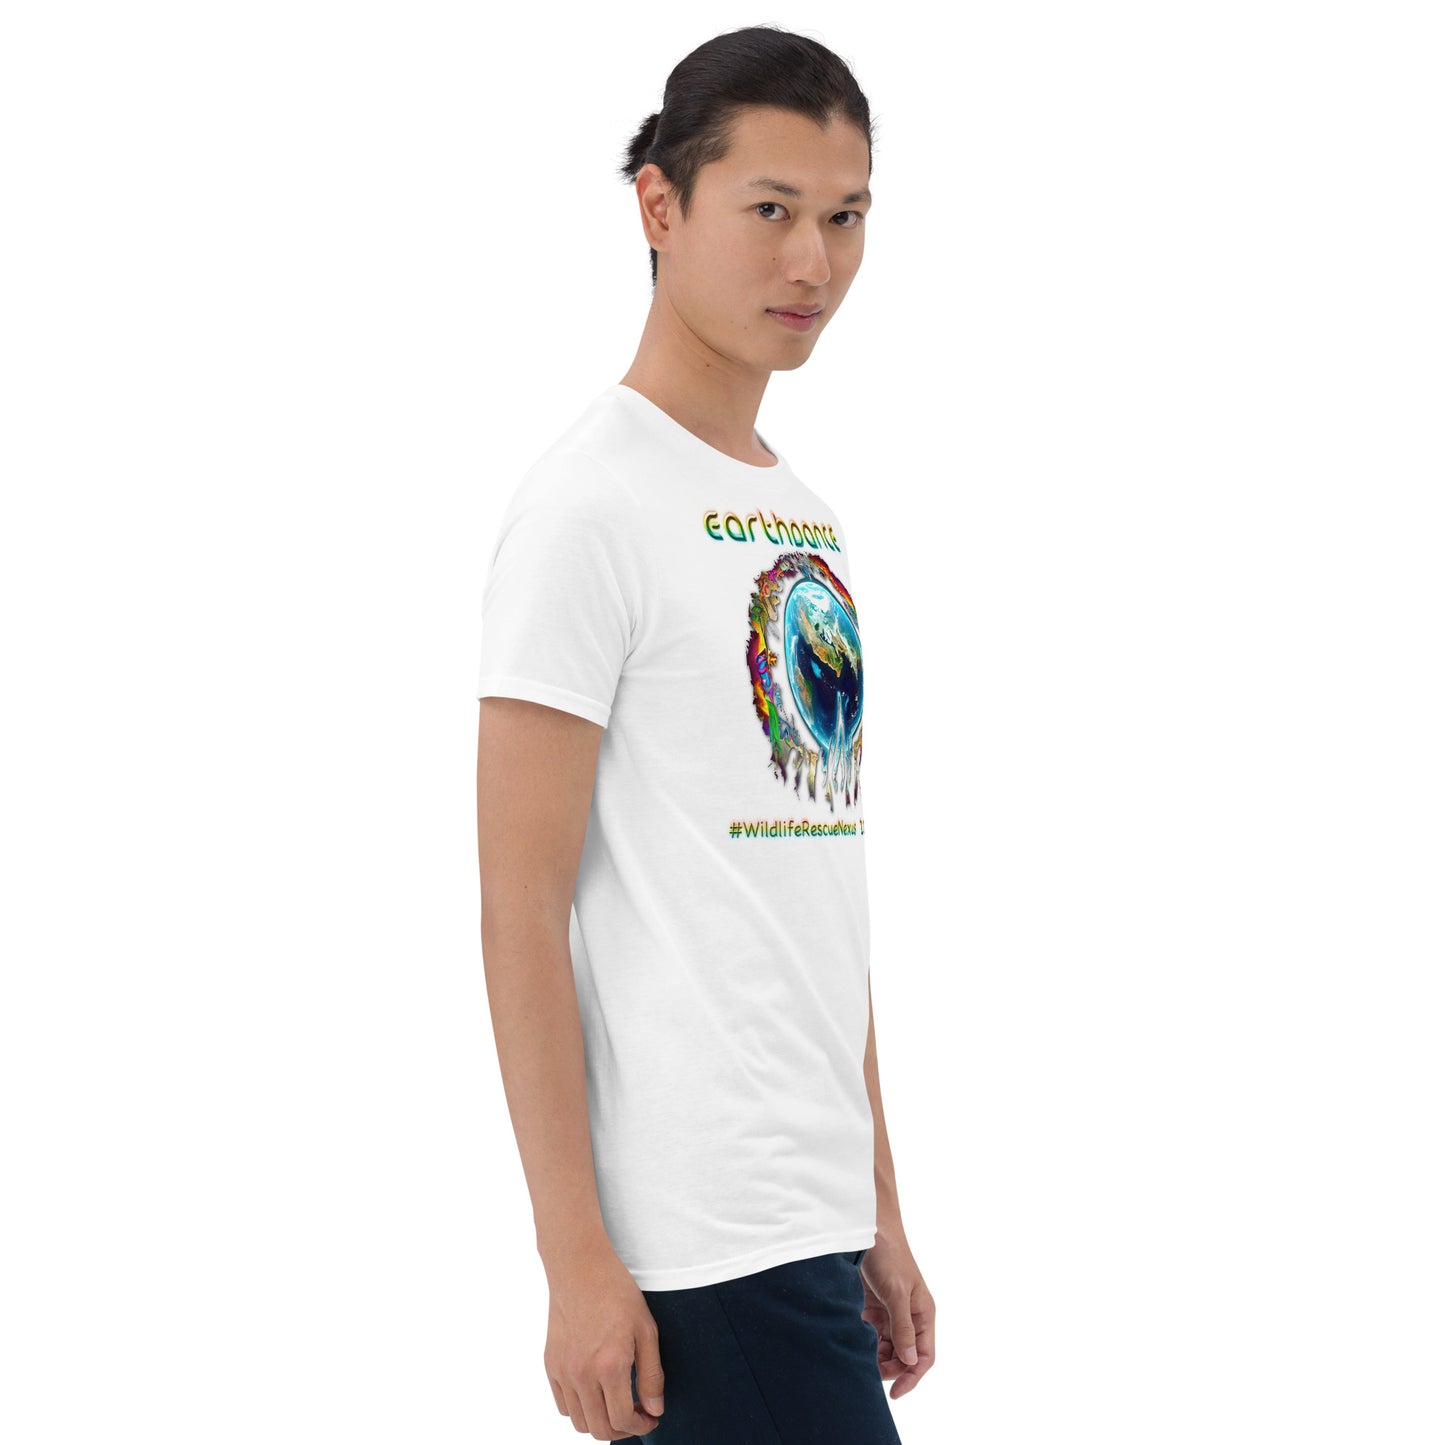 Earthdance 2023 - Poliphonic v1 - Limited Edition - Short-Sleeve Unisex T-Shirt - The Foundation of Families